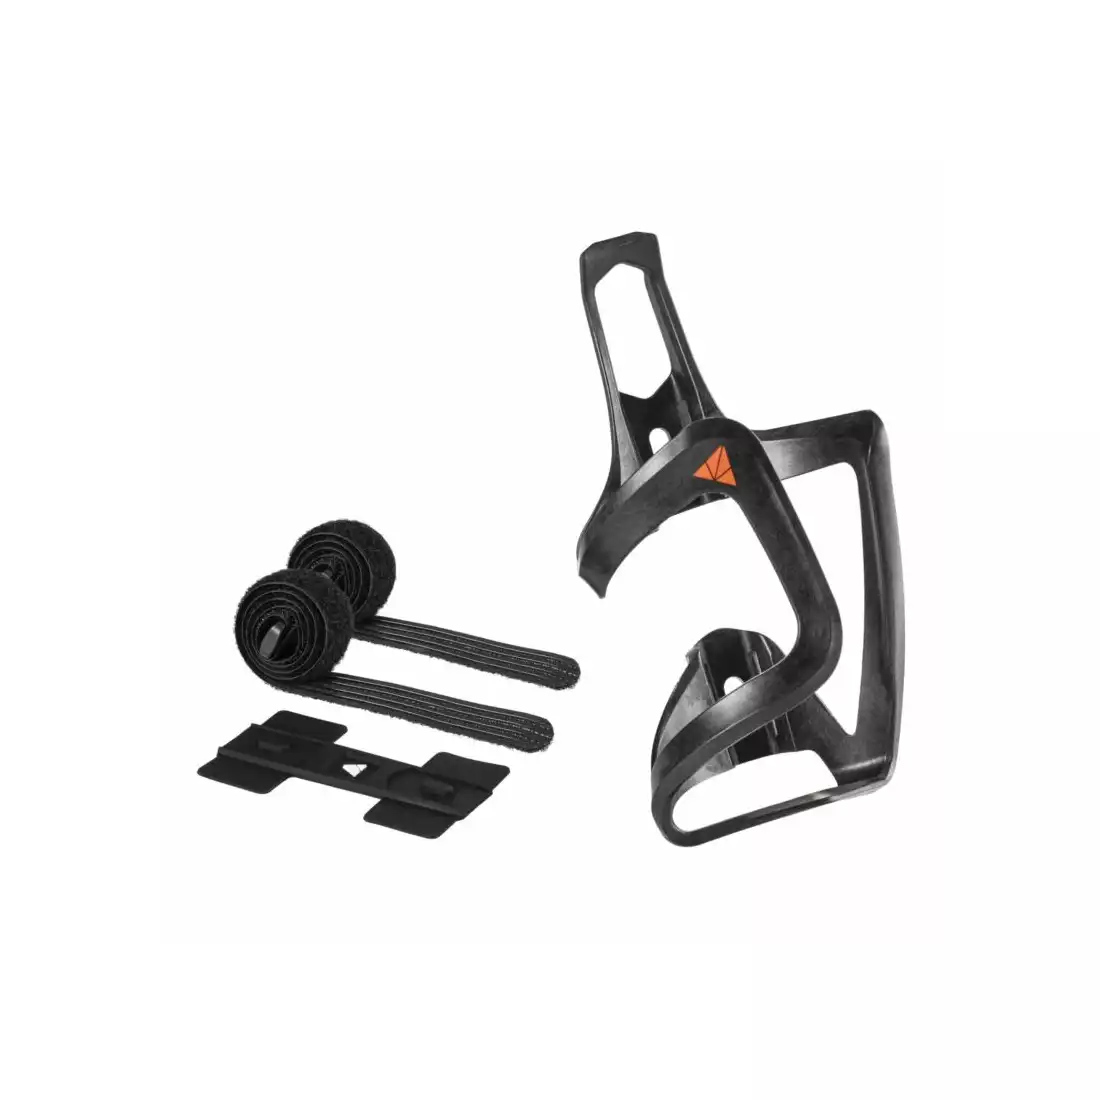 GRANITE Aux Carbon water bottle cage with straps, black